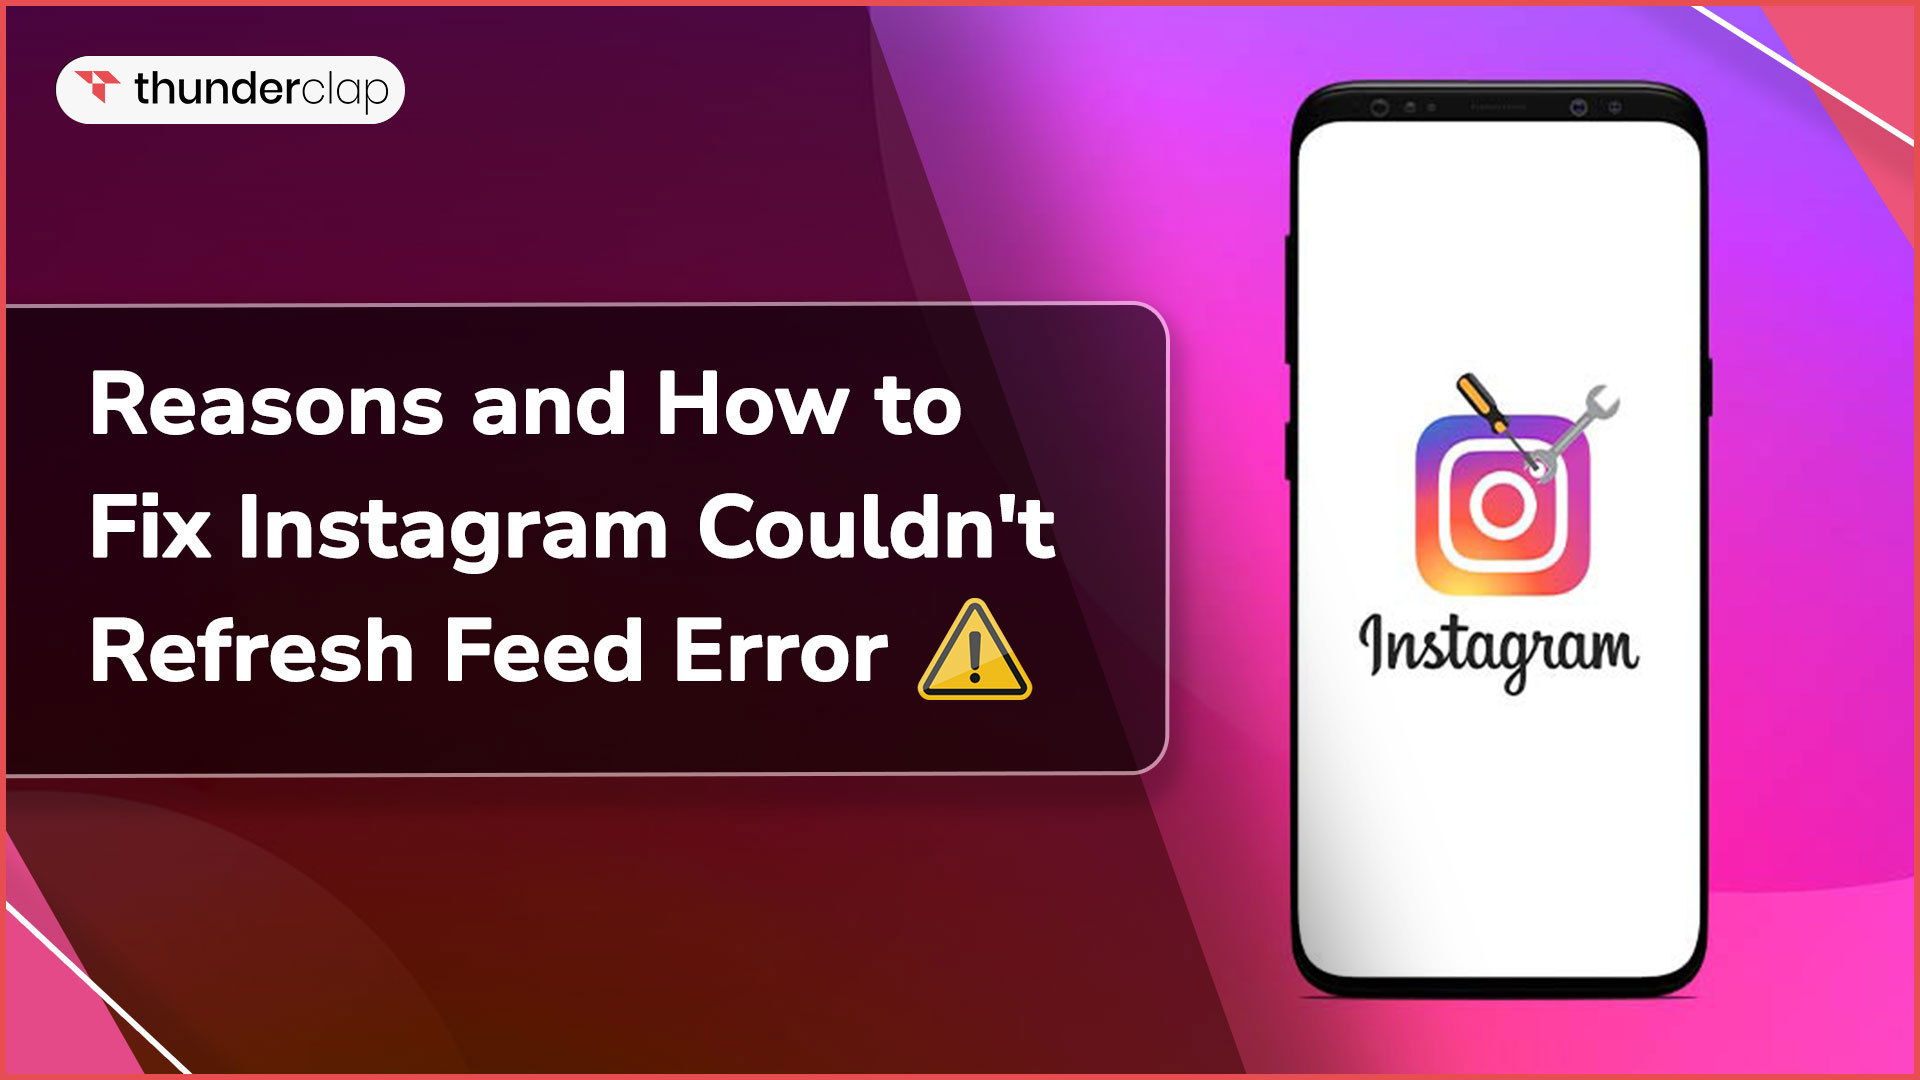 How to Fix Instagram Couldn't Refresh Feed Error
